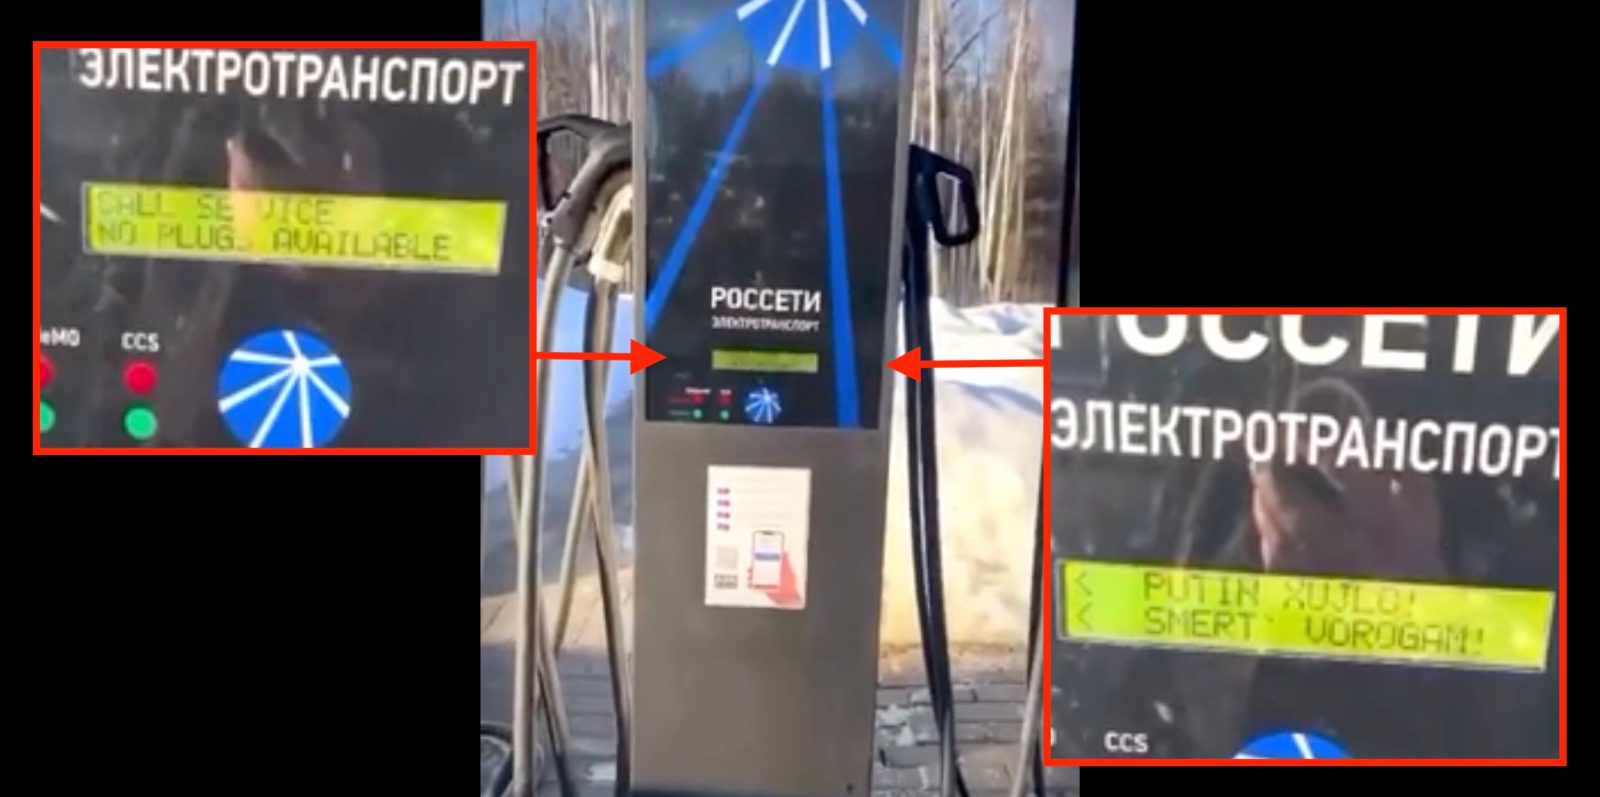 Hacked electric car charging stations in Russia display 'Putin is a d